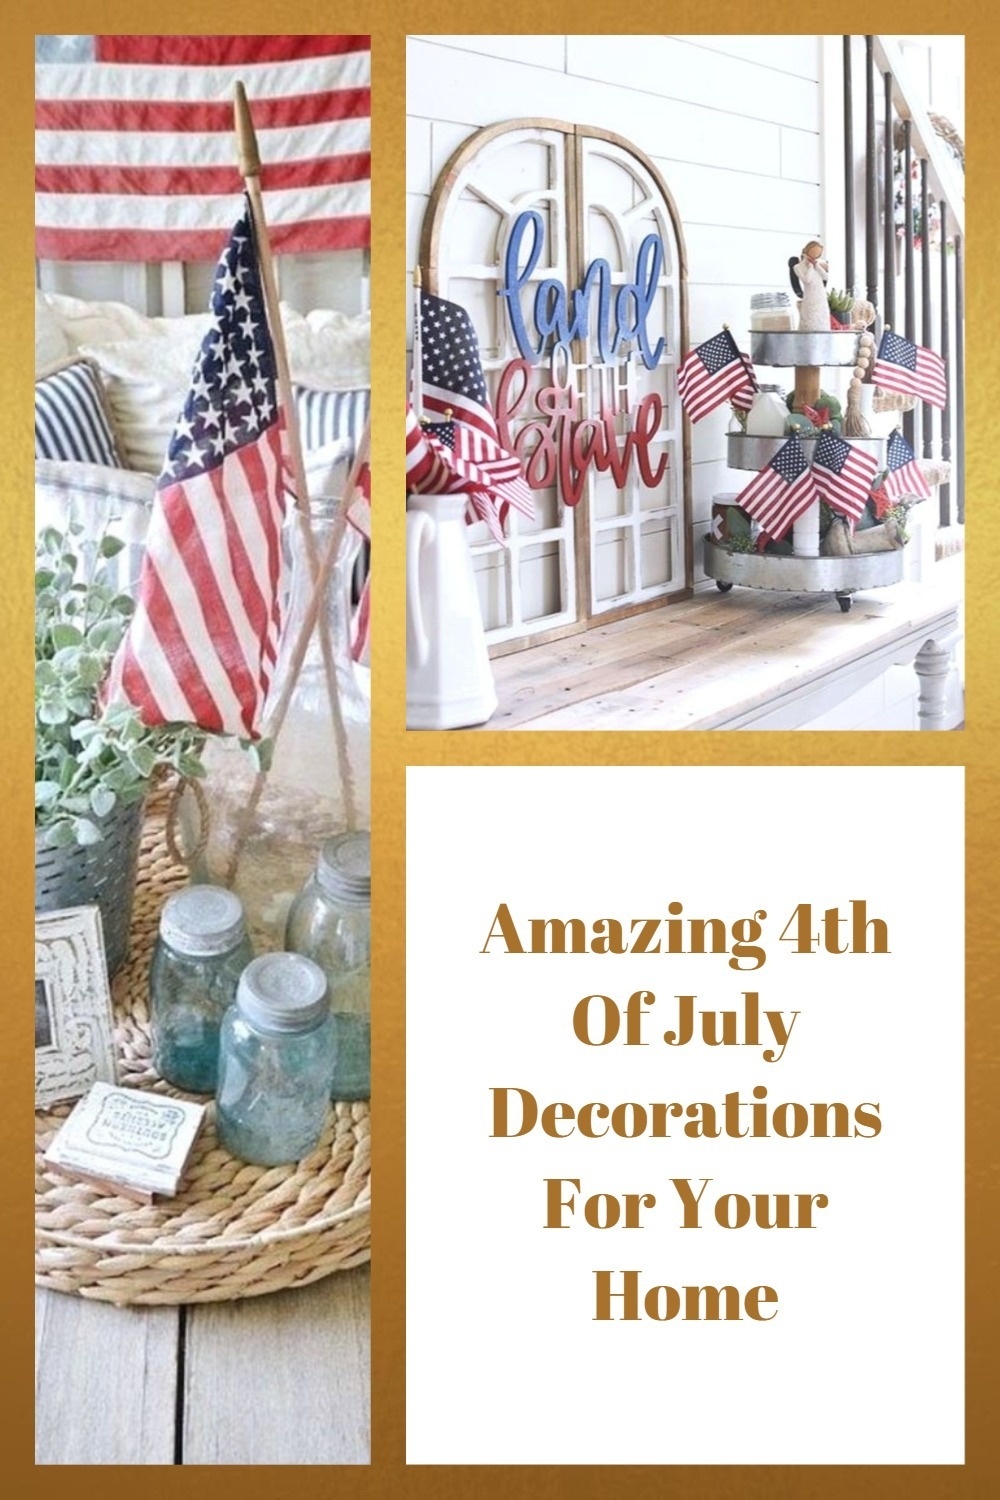 Amazing 4th Of July Decorations For Your Home